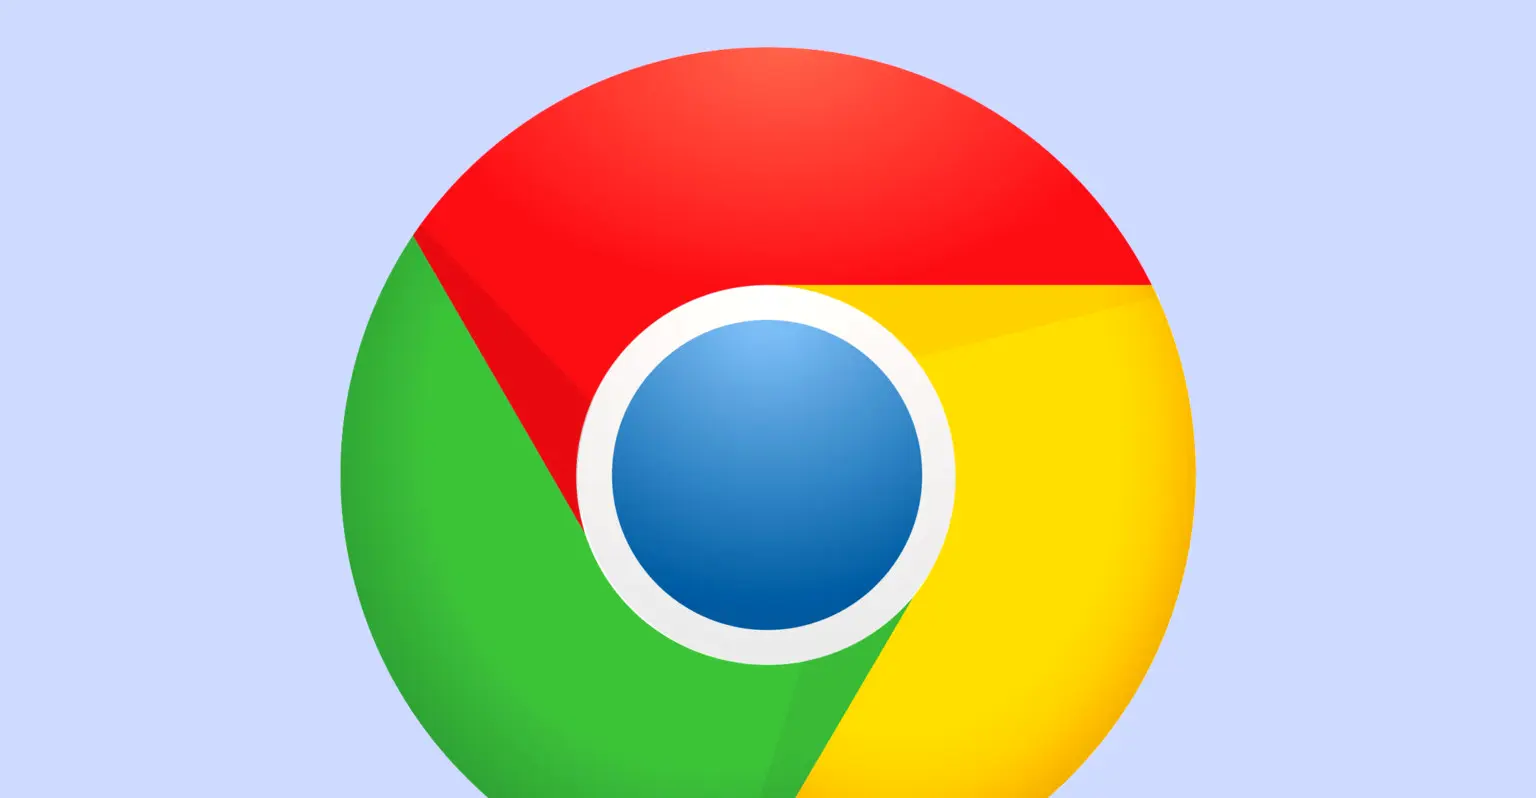 Google Chrome, approximately used by 2.65BN users, dominates the web browser market.